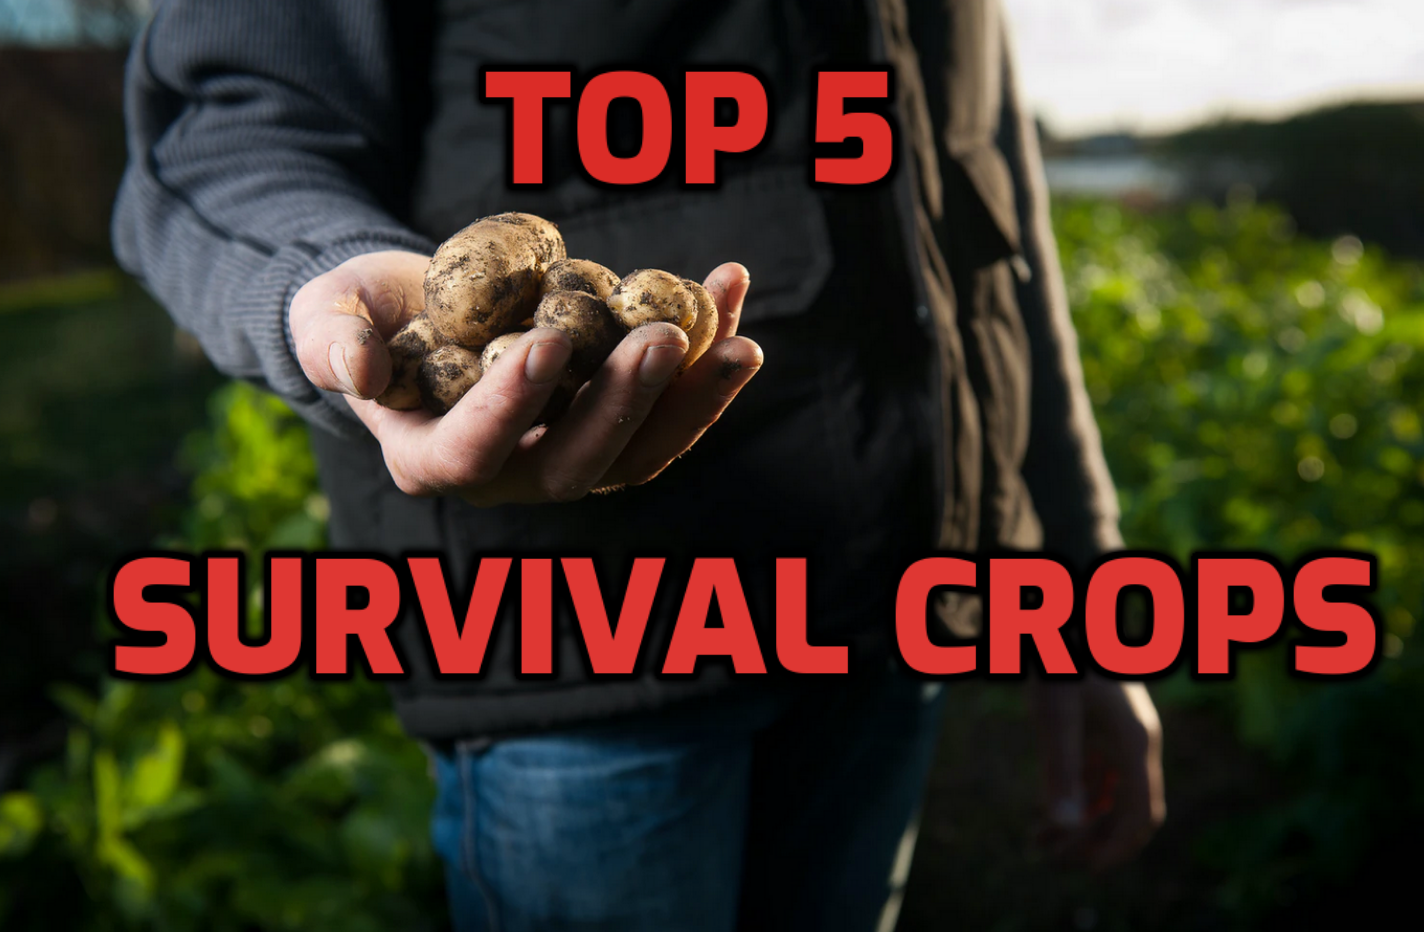 Top 5 Survival Crops to Grow During a Food Shortage